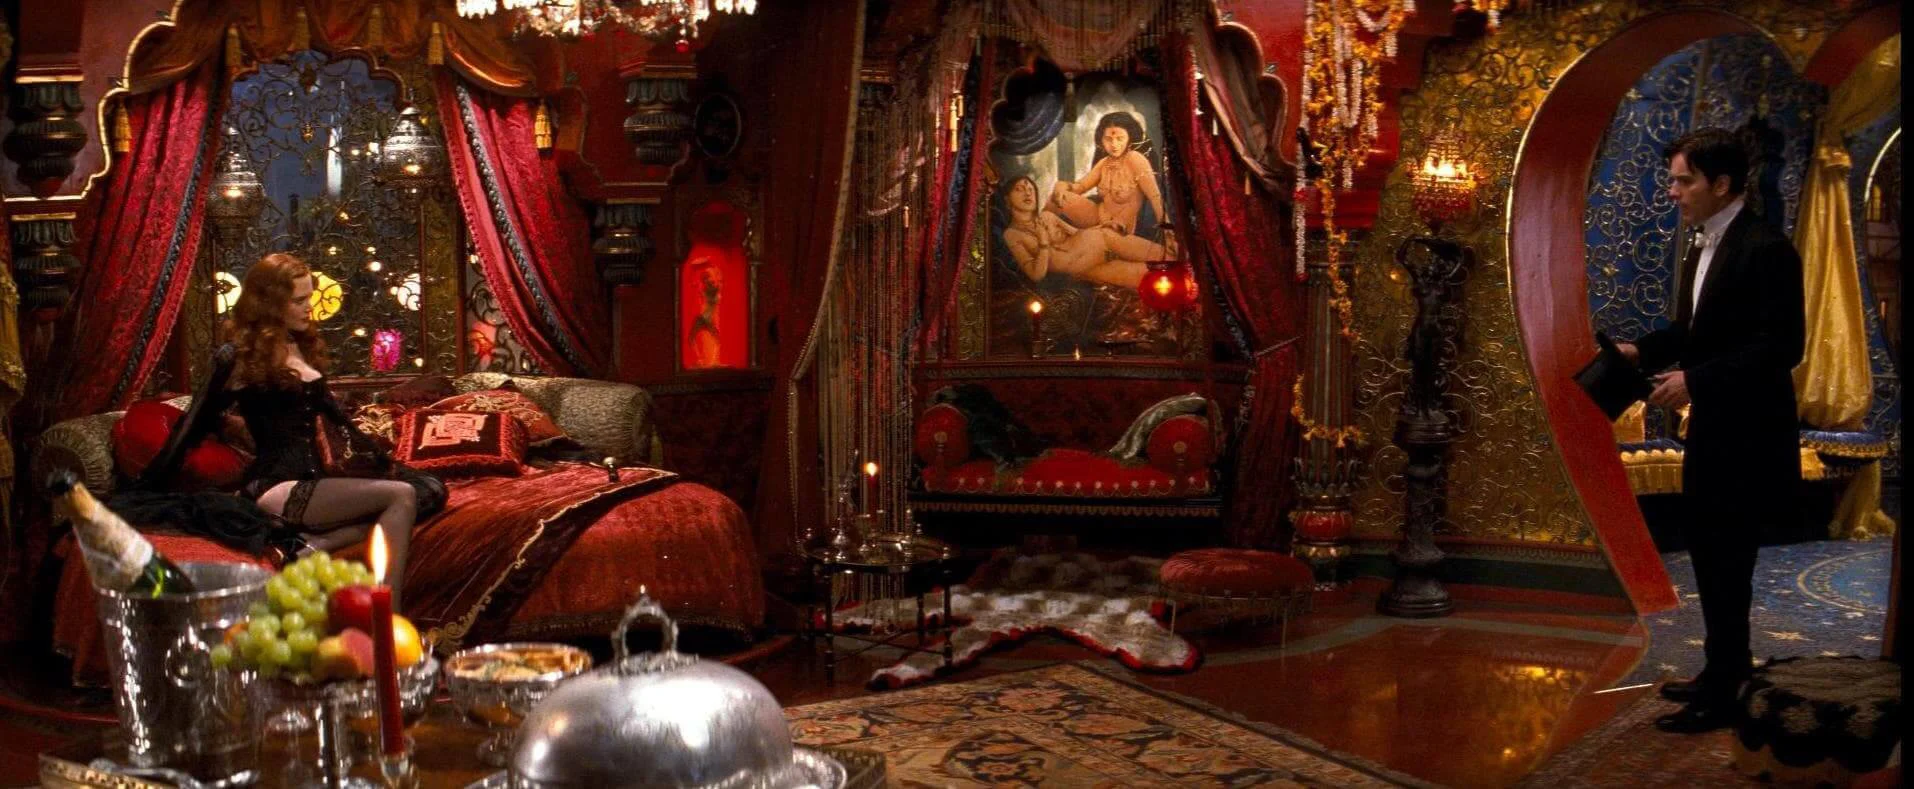 10 Production Design Tips For Filmmakers on a Budget - Moulin Rouge